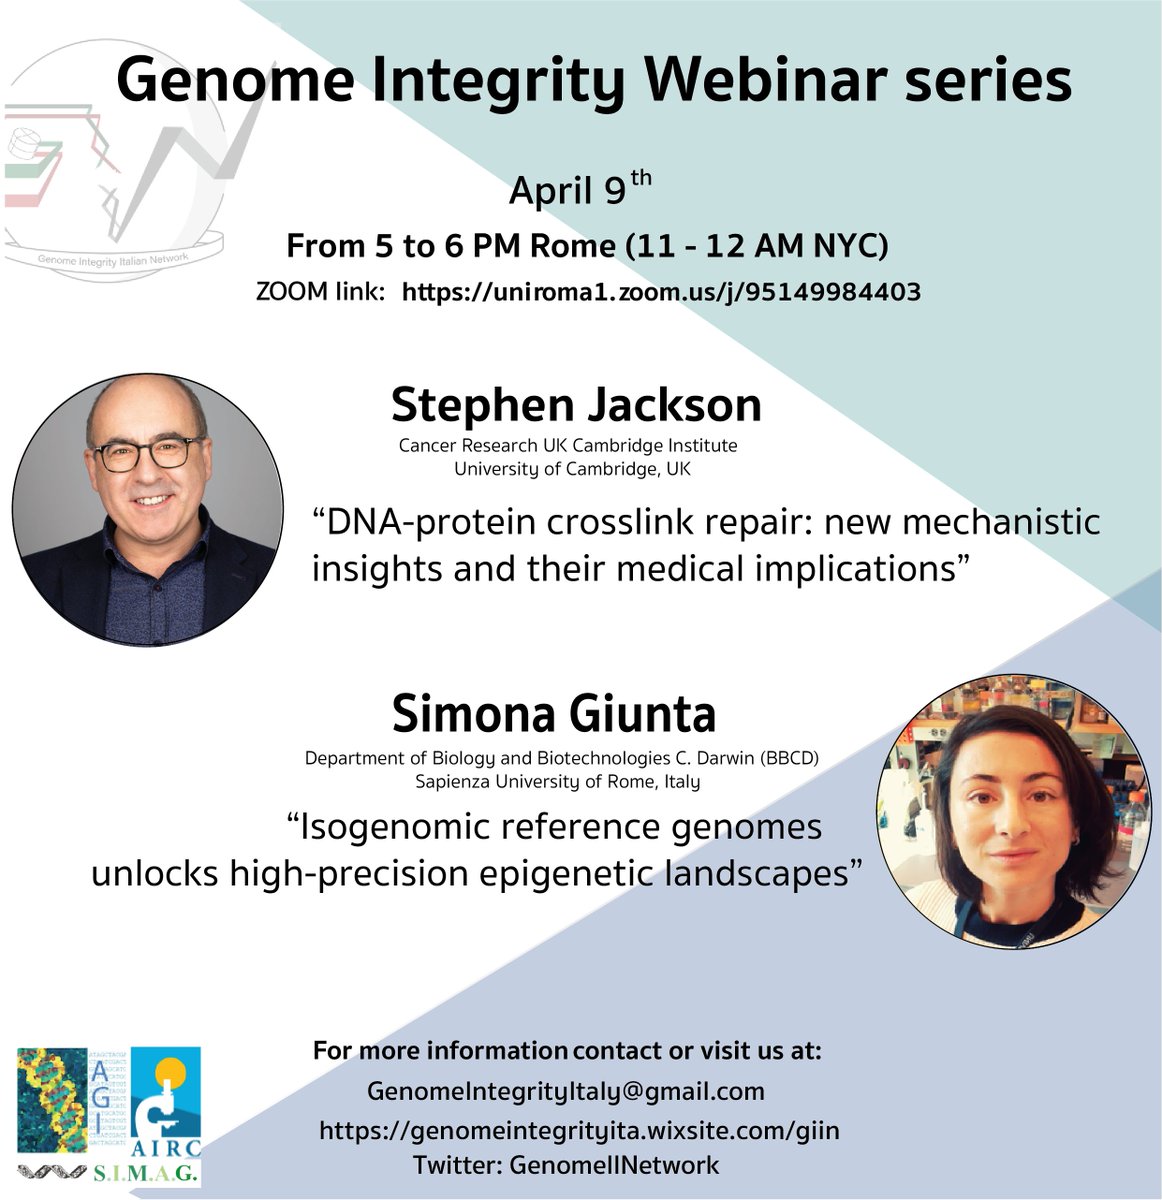 Dear community, we are very happy to announce the next Giin webinar!! Don't miss it on Tuesday, April 9th, from 5PM Rome (11AM NYC), with Stephen Jackson @SPJacksonGroup and Simona Giunta @Simona_Giunta. Zoom link: uniroma1.zoom.us/j/95149984403